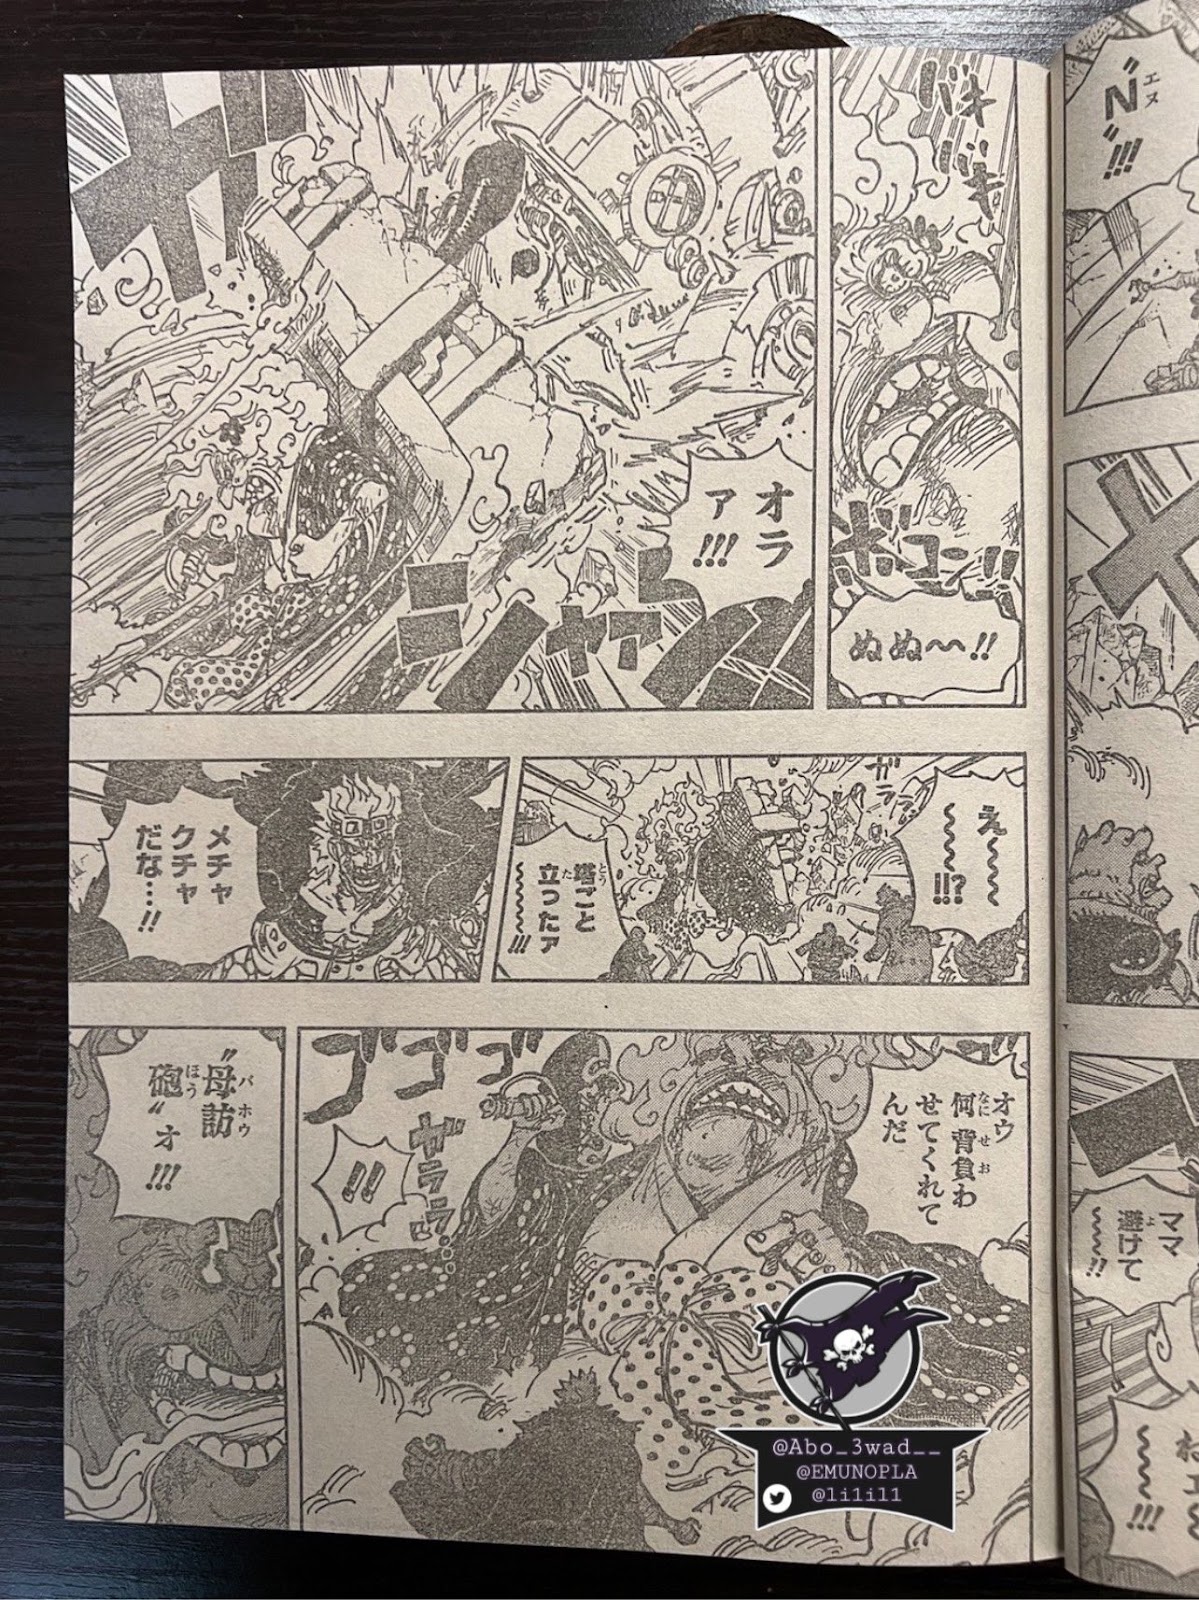 One Piece: Chapter chapitre-1039 - Page 9